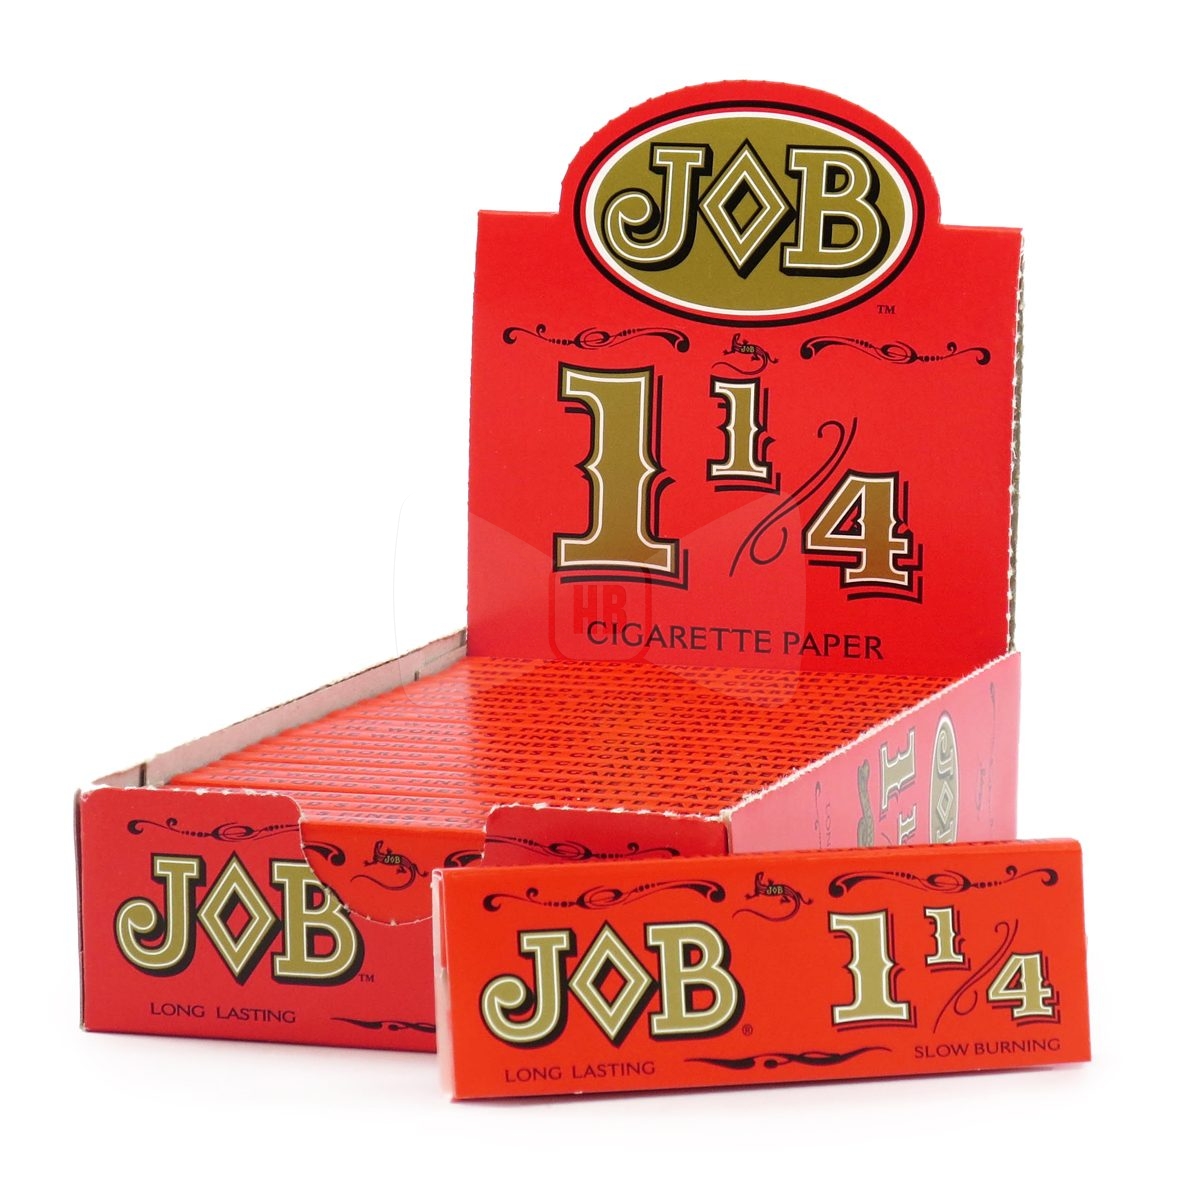 JOB Slow Burning 1 1/4 Rolling Papers 1 Pack